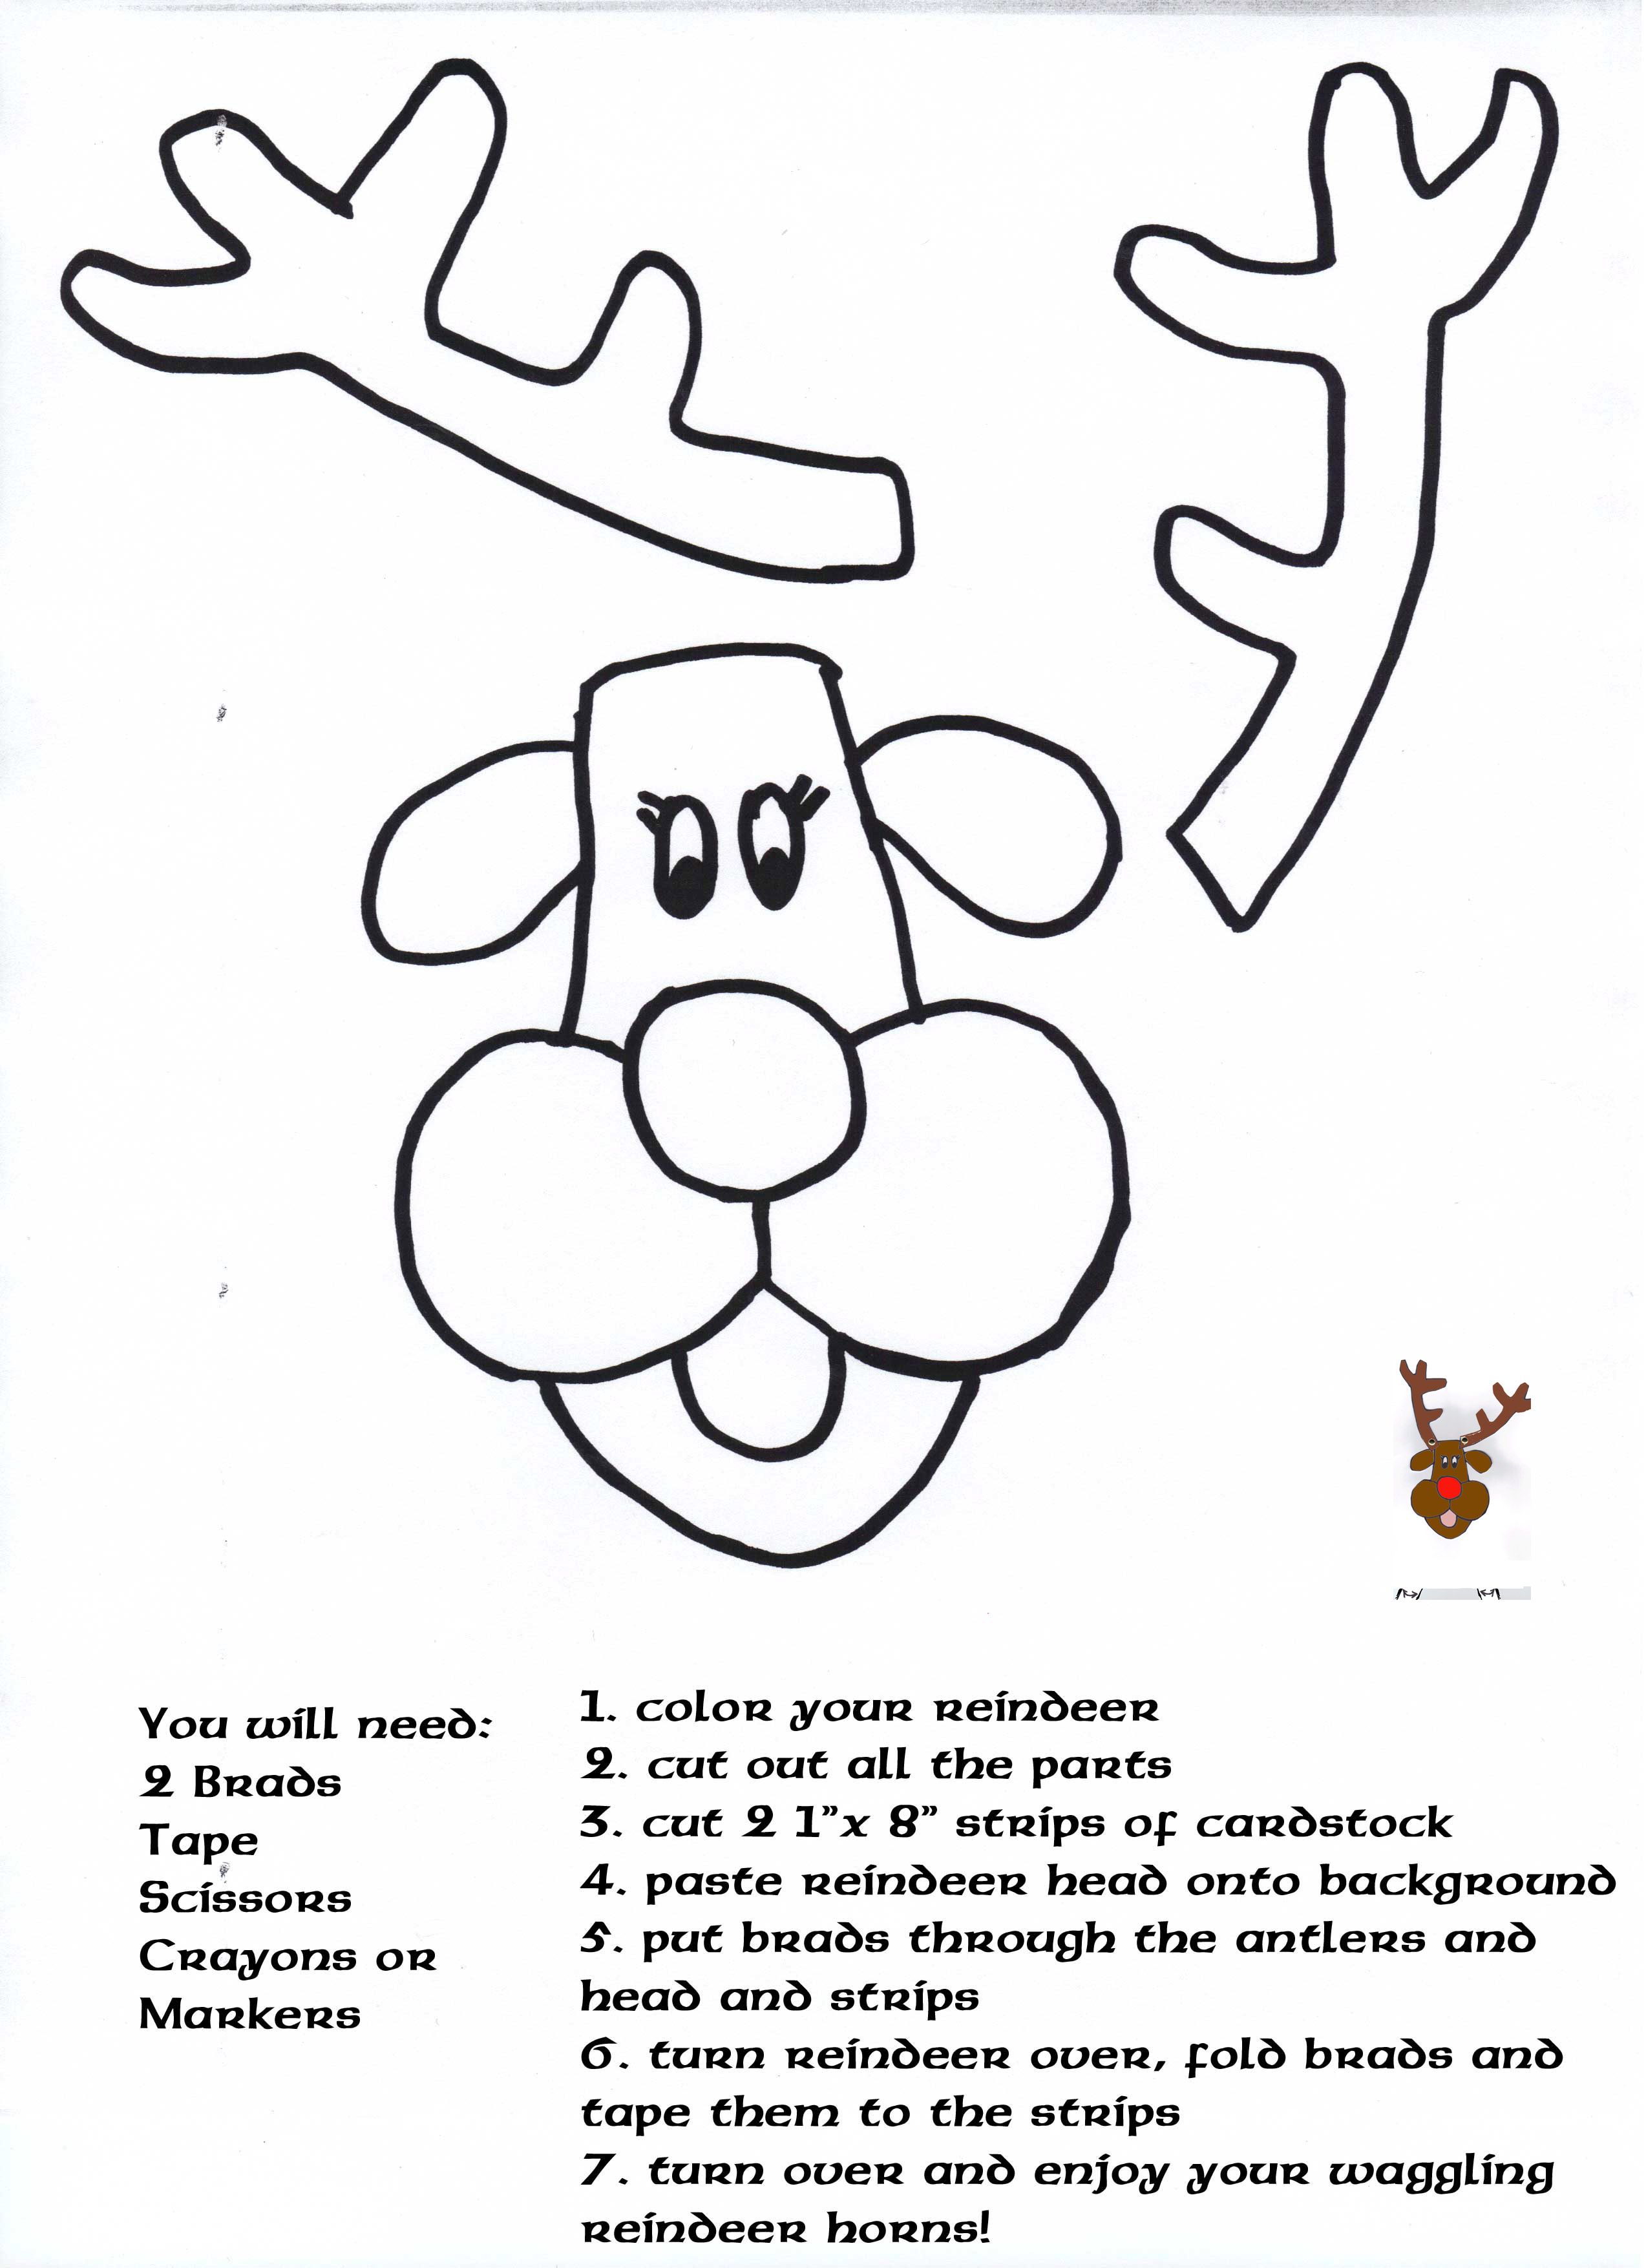 Reindeer Coloring Pages | Forcoloringpages.com